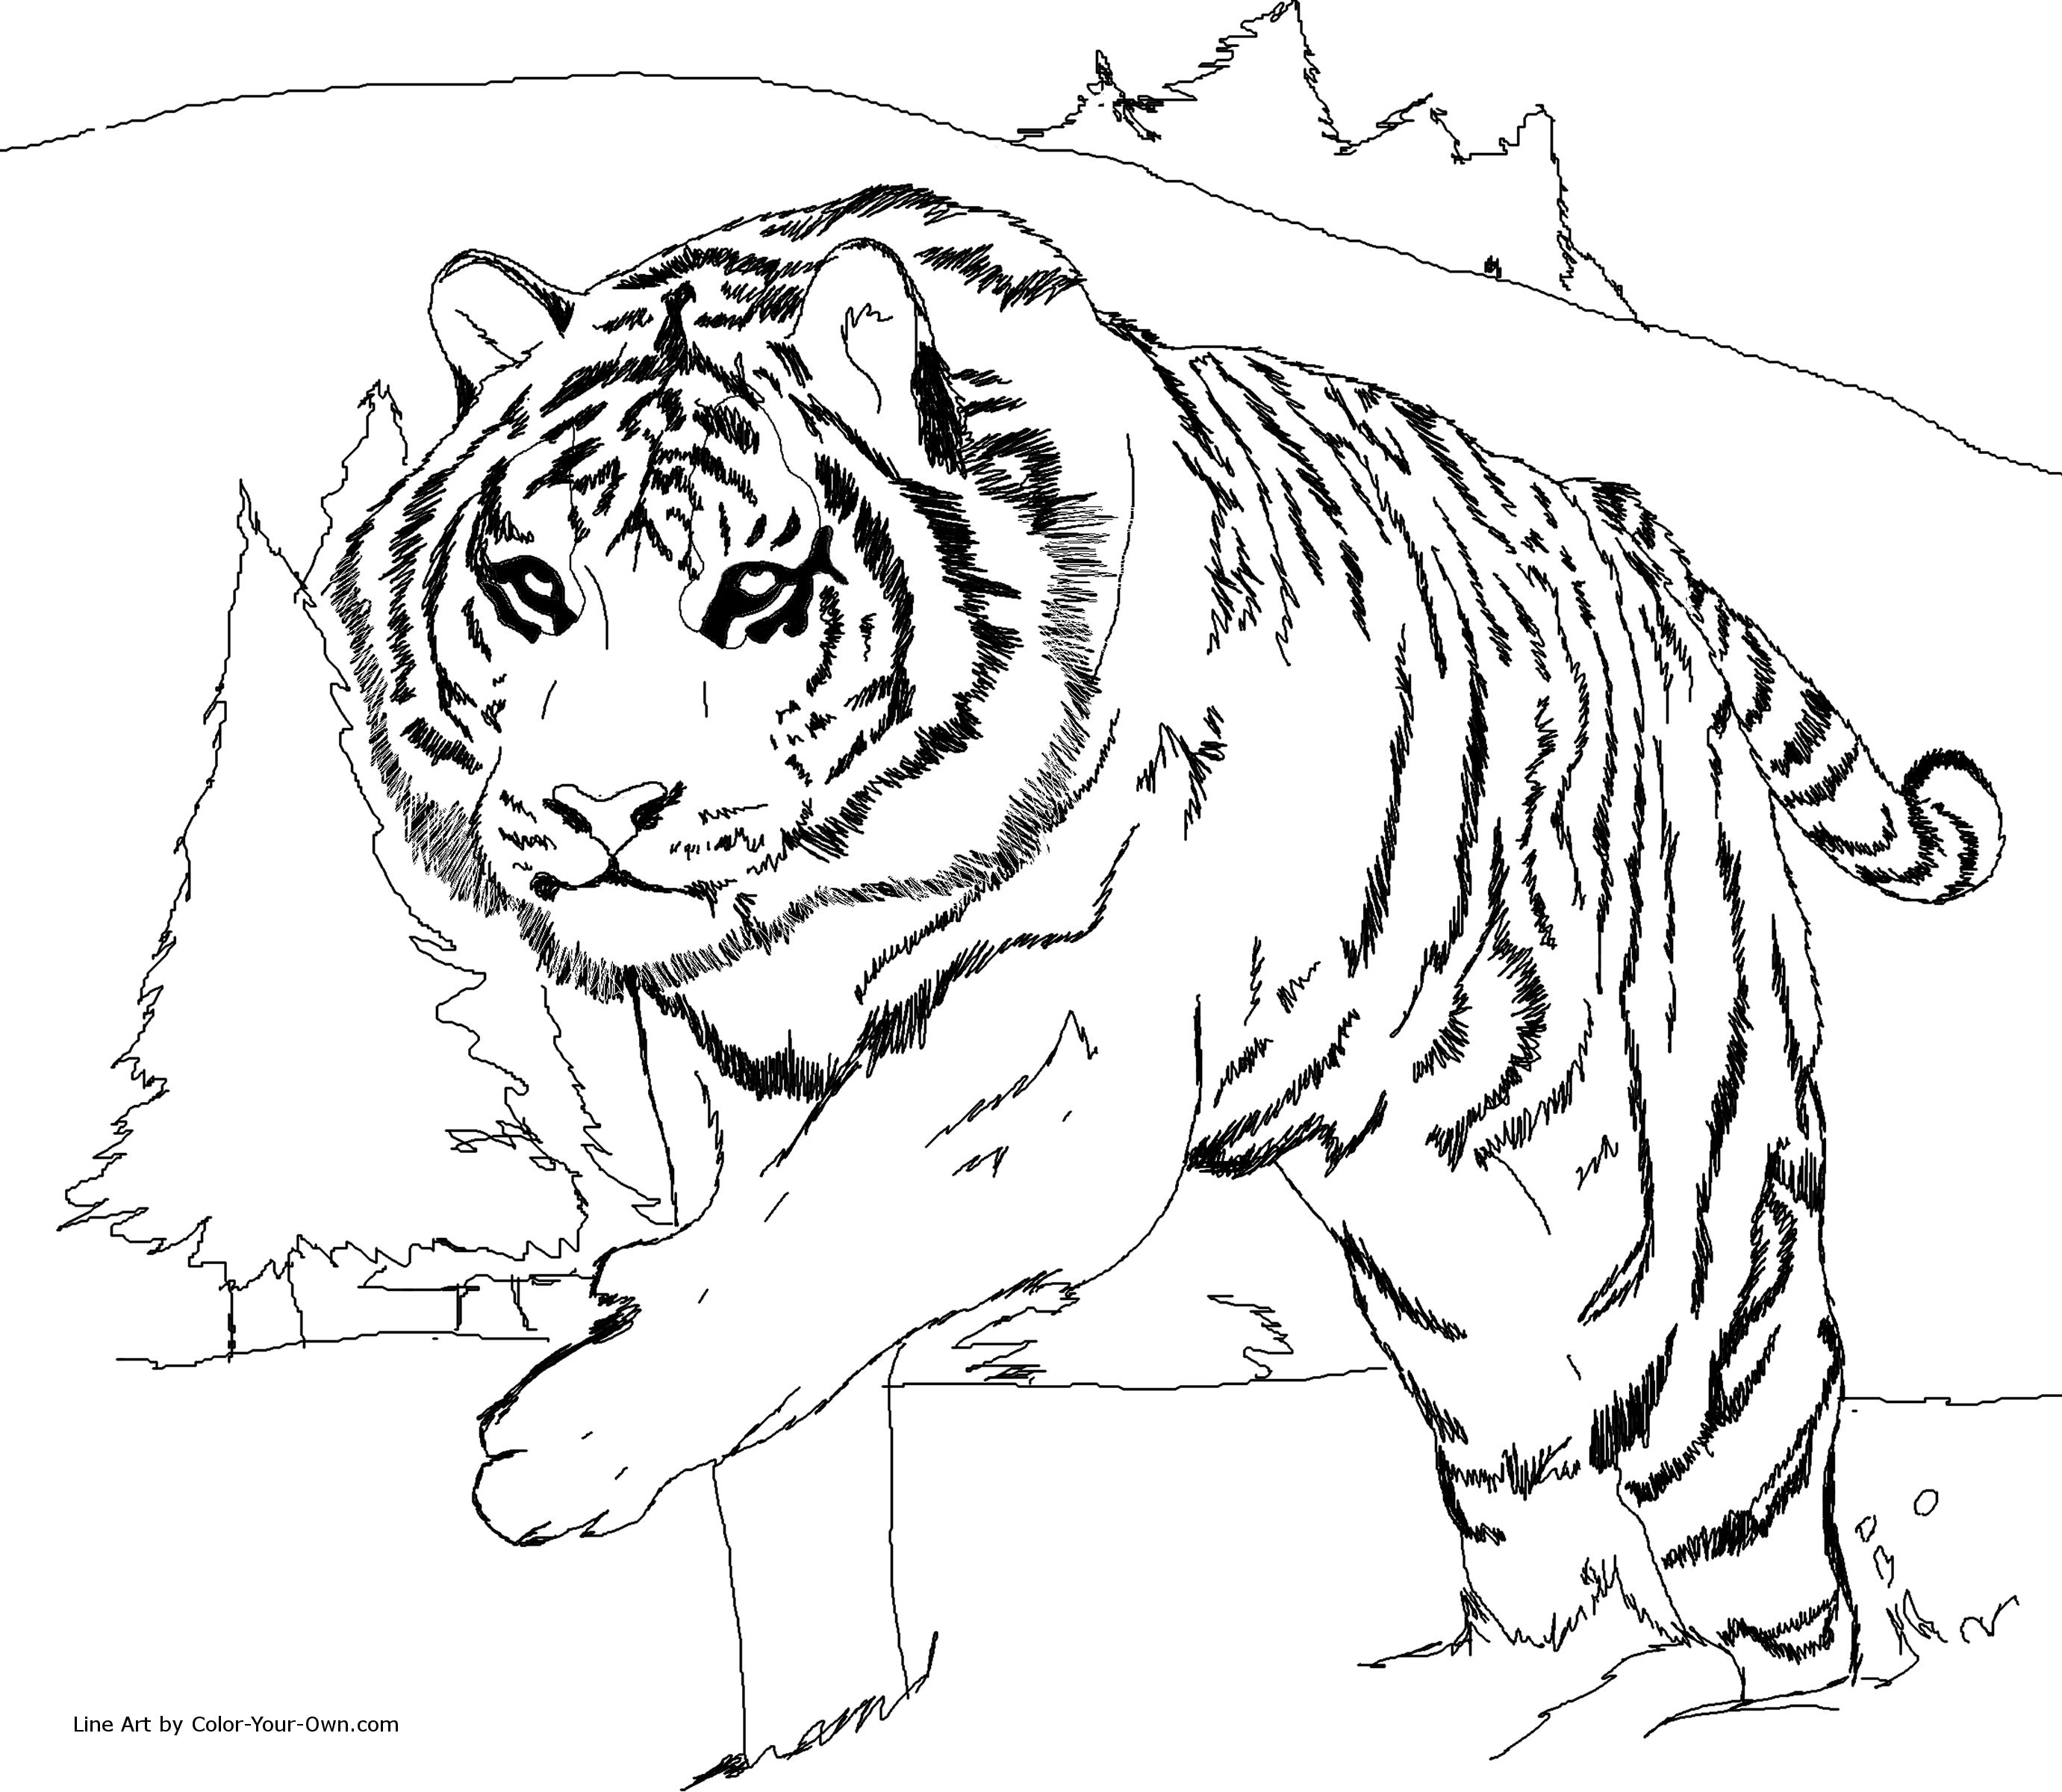 Coloring Pages Of Cute Tigers Lion And Tiger Coloring Pages At Getdrawings Free For Personal